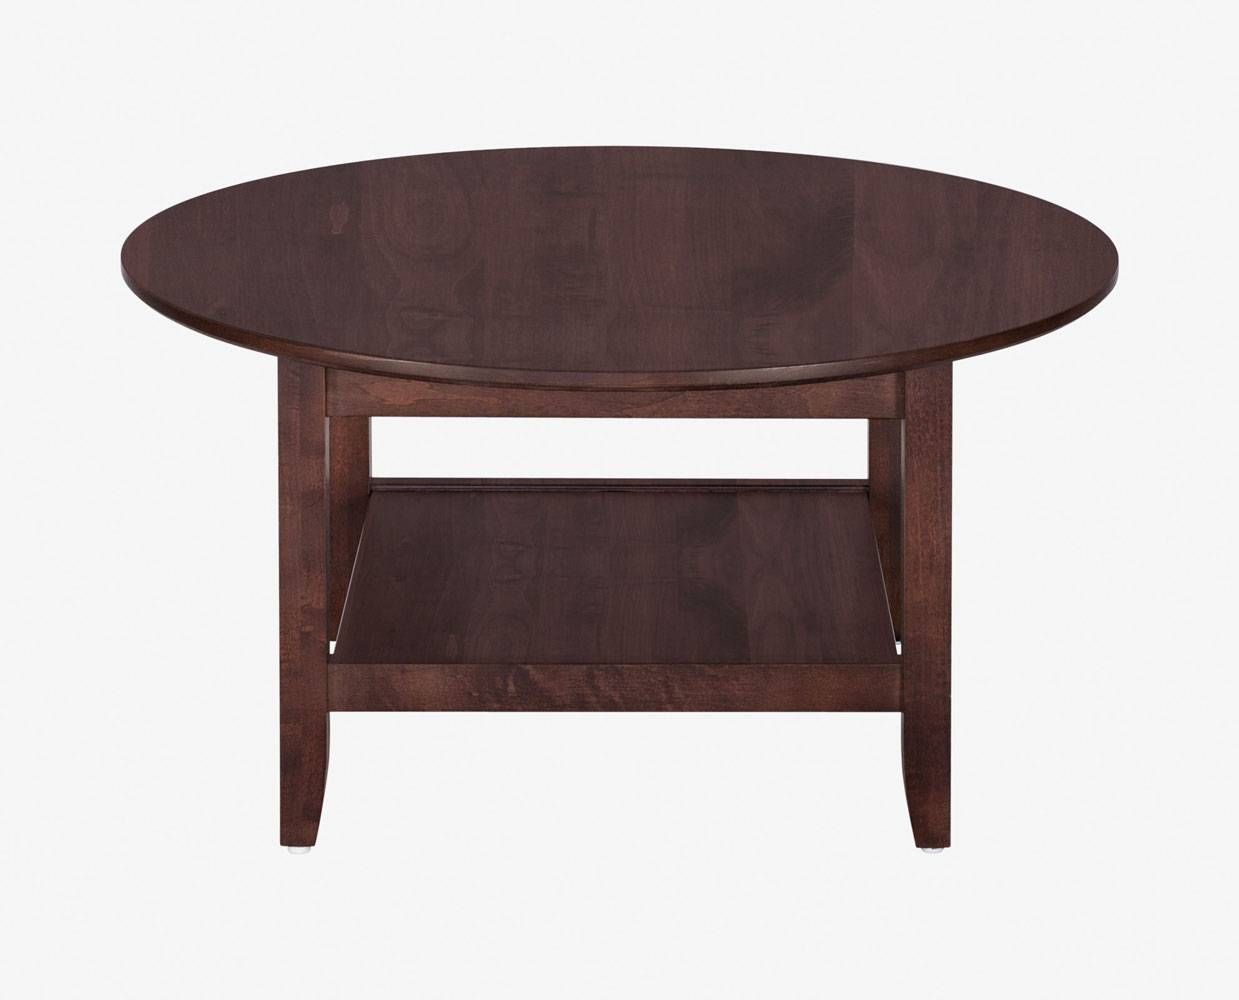 Coffee Tables: Glamorous Round Coffee Tables Designs Round Coffee Pertaining To Dark Wood Round Coffee Tables (View 16 of 30)